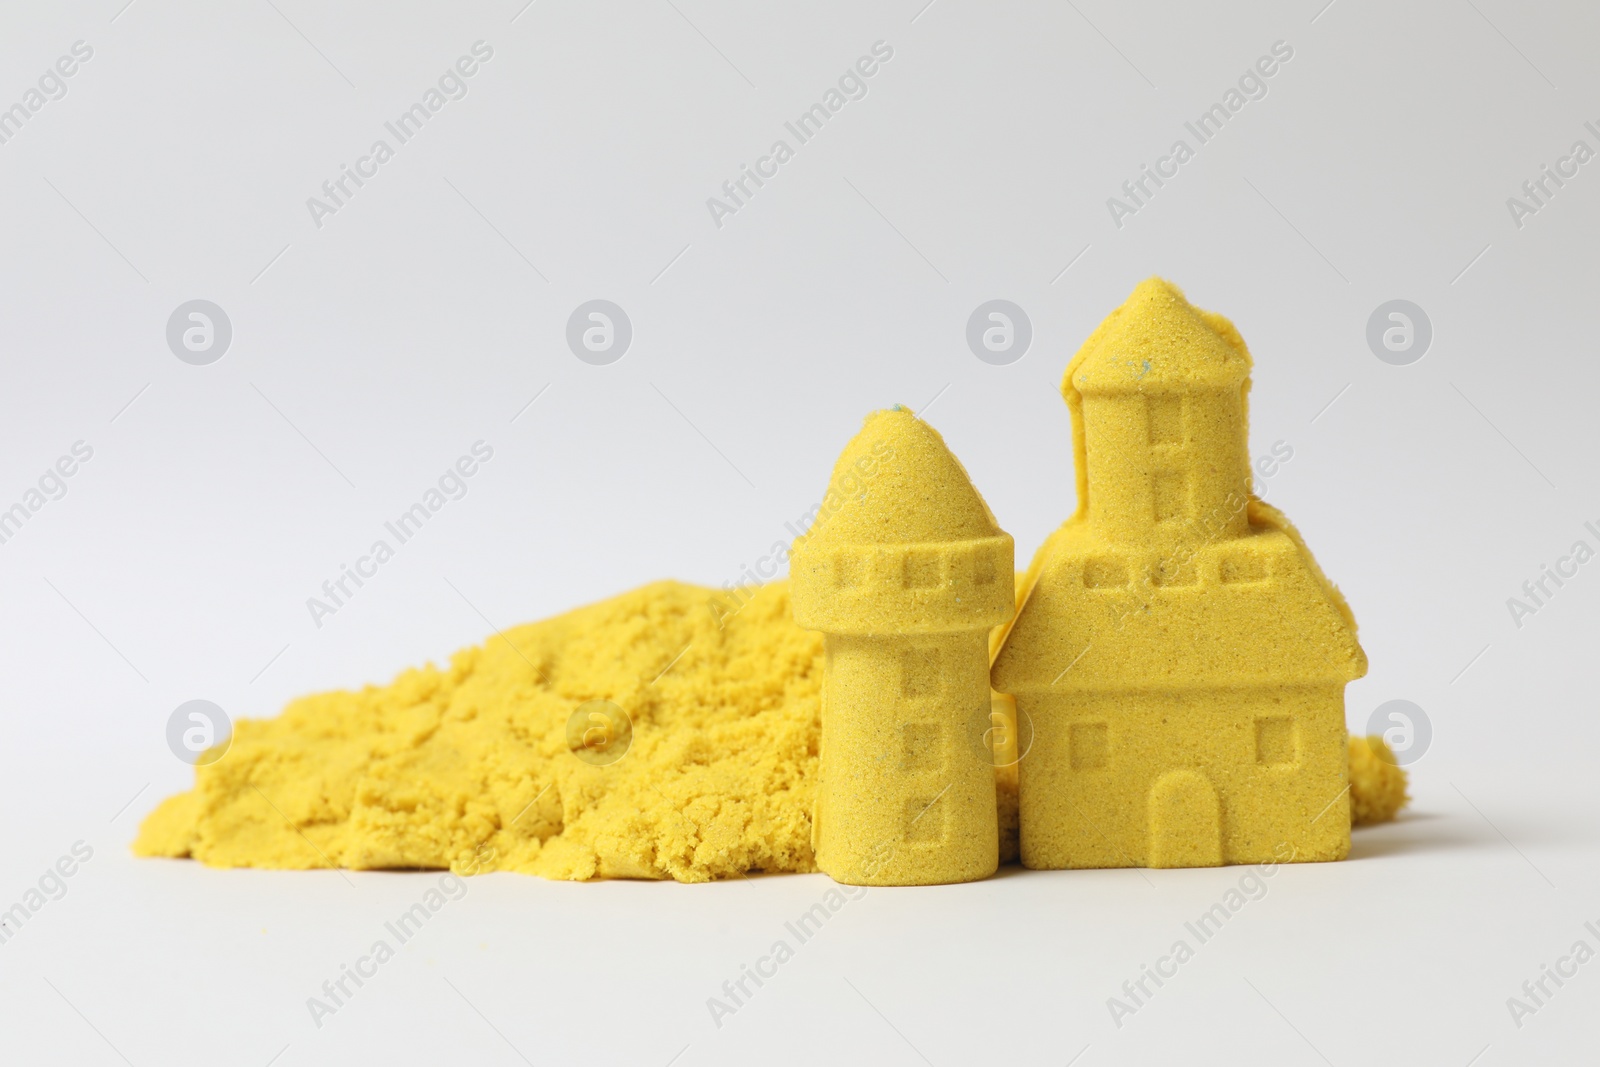 Photo of Castle and tower made of yellow kinetic sand on white background